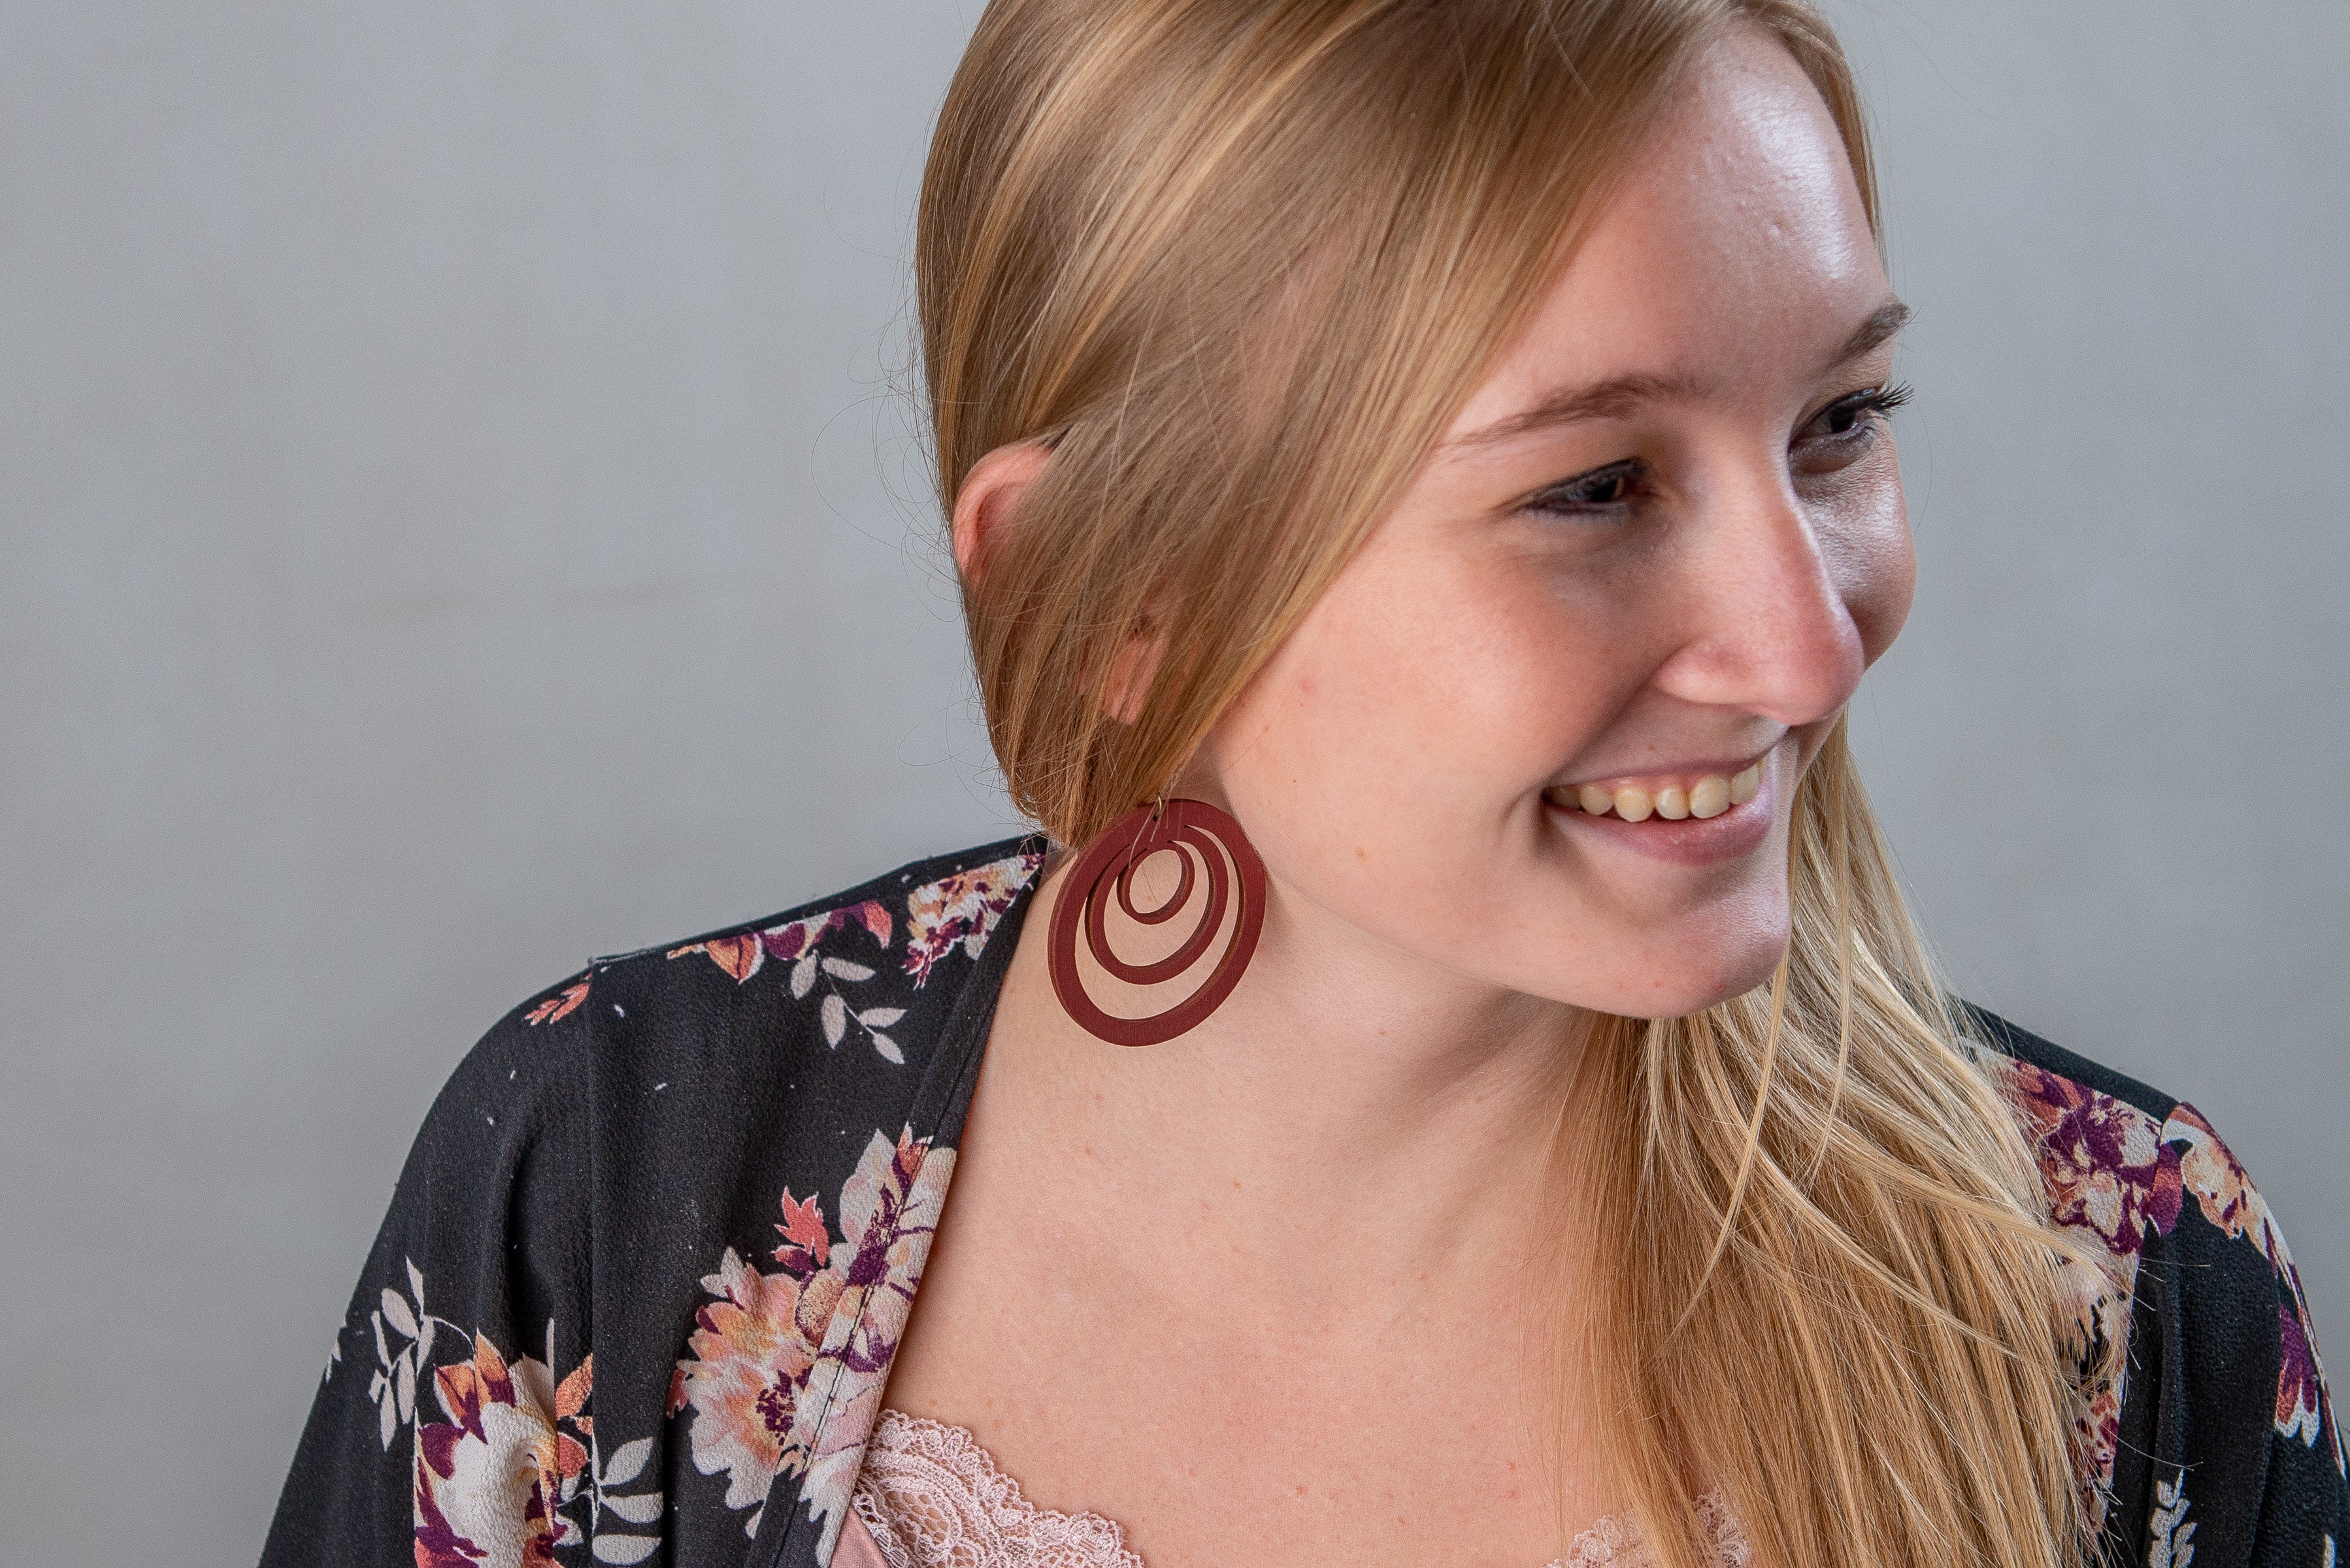 Matte Red Round Wood Earrings